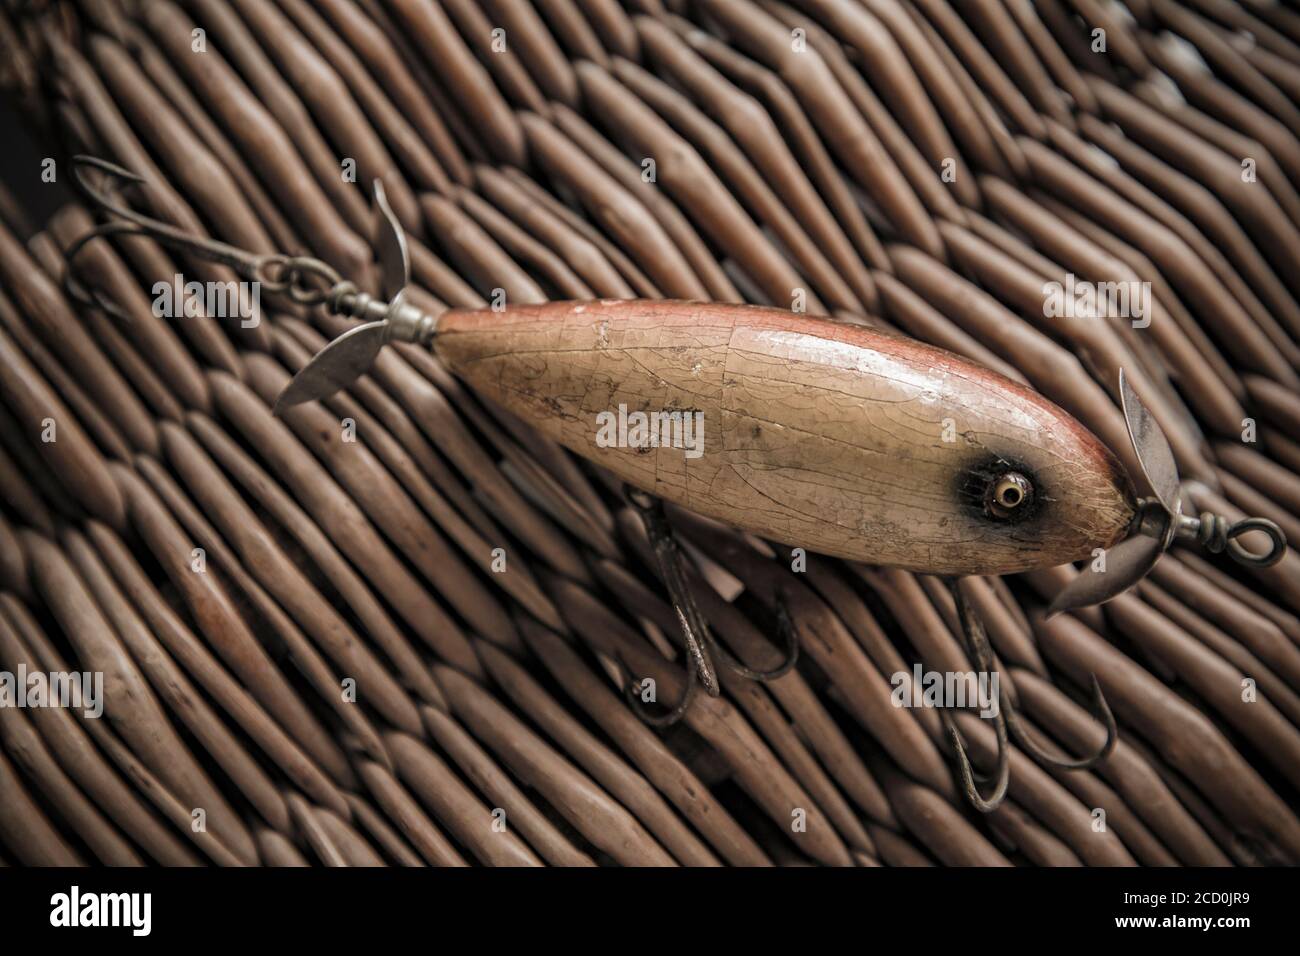 https://c8.alamy.com/comp/2CD0JR9/an-old-south-bend-fishing-lure-or-plug-designed-for-catching-predatory-fish-photographed-against-the-whicker-lid-of-an-old-tackle-box-from-a-collec-2CD0JR9.jpg